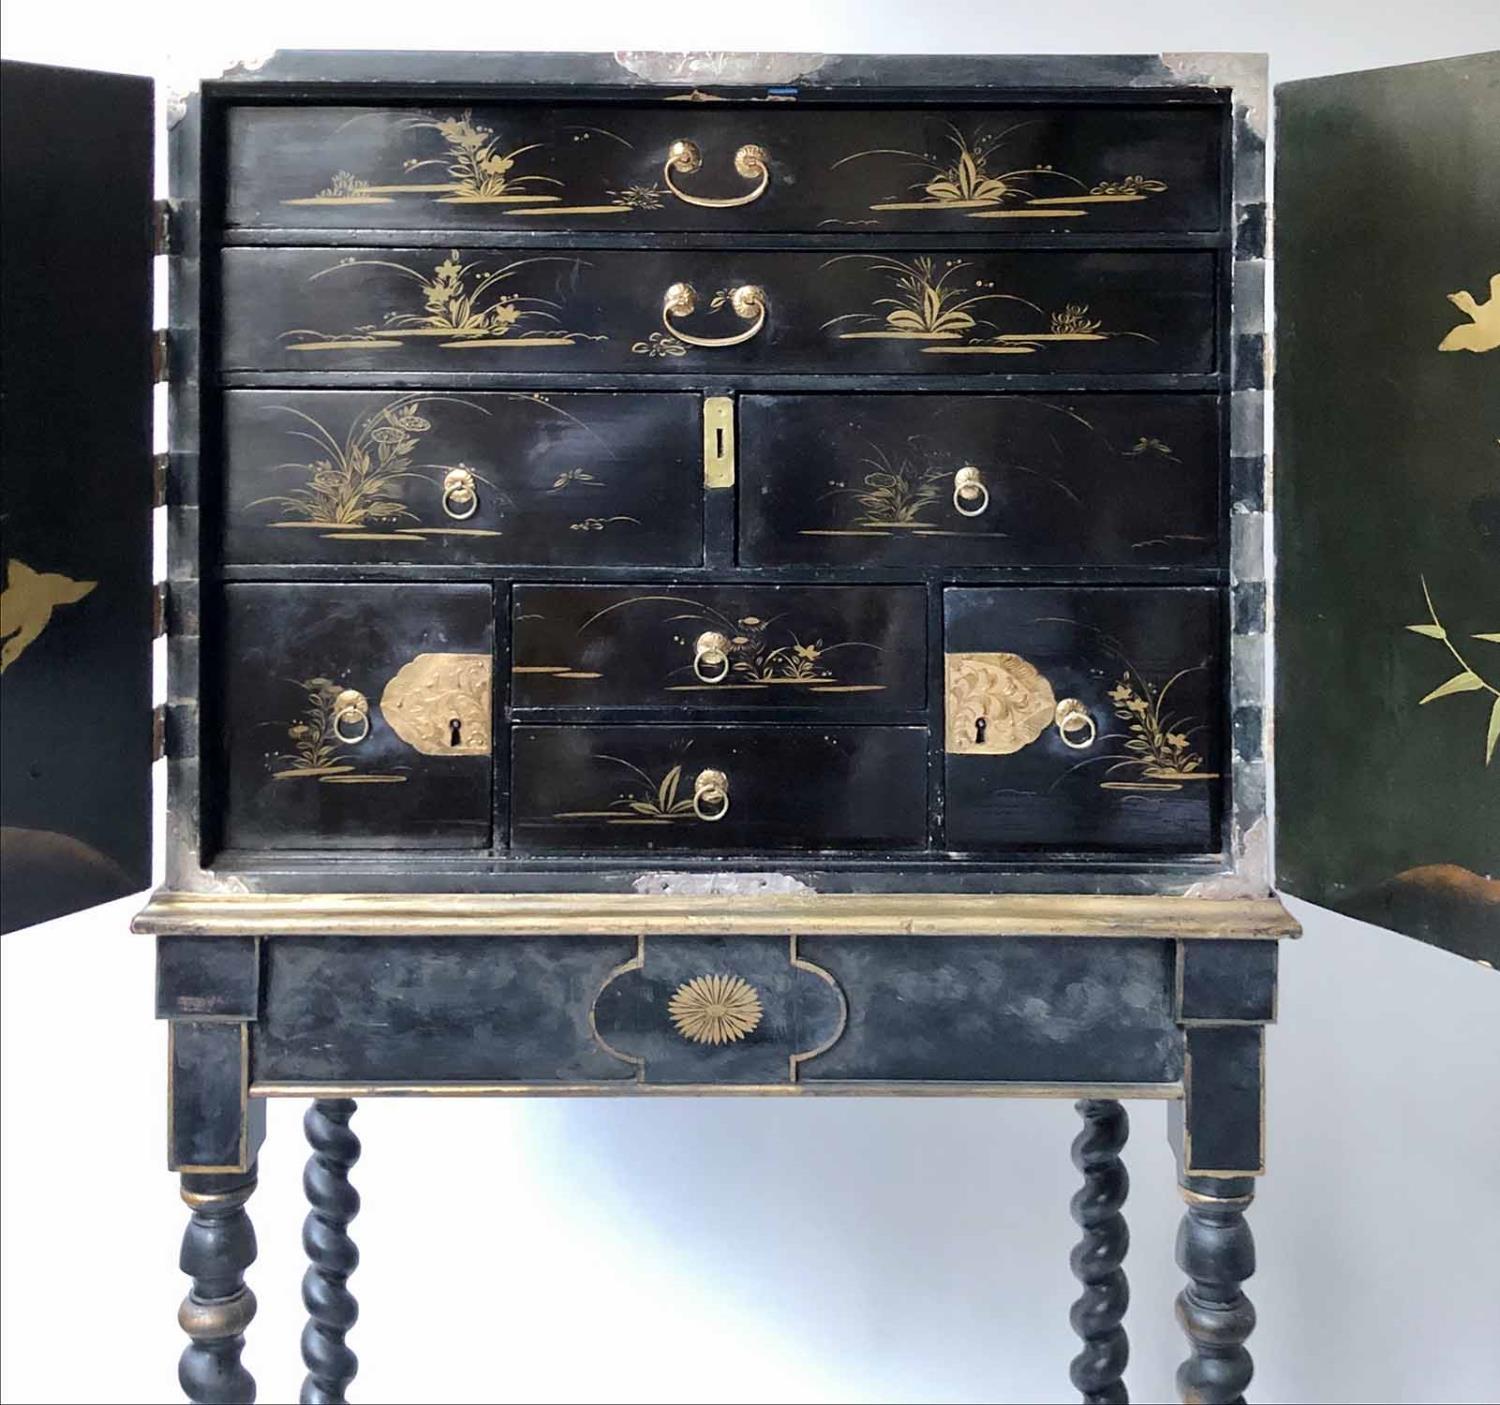 CABINET ON STAND, 18th century Chinese export decorated gilt and black lacquer with two doors - Image 2 of 6